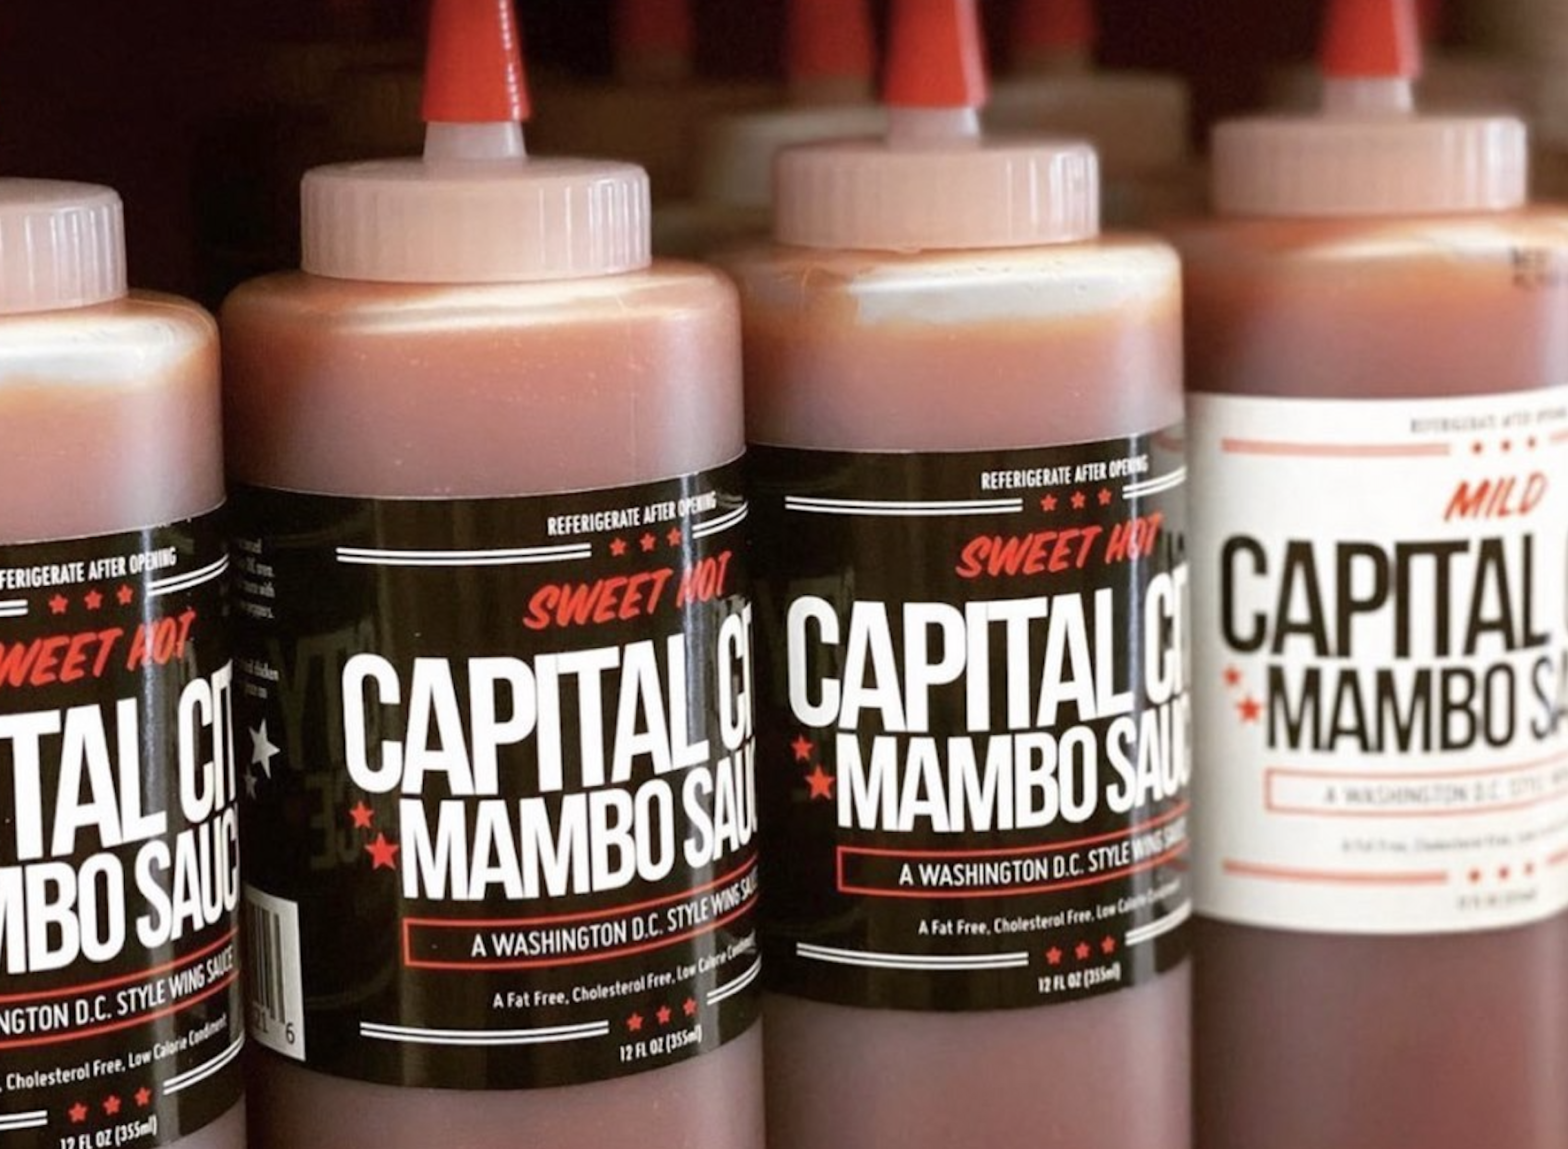 Black-Owned Mambo Sauce Is Coming To A City Near You After Partnering With KFC